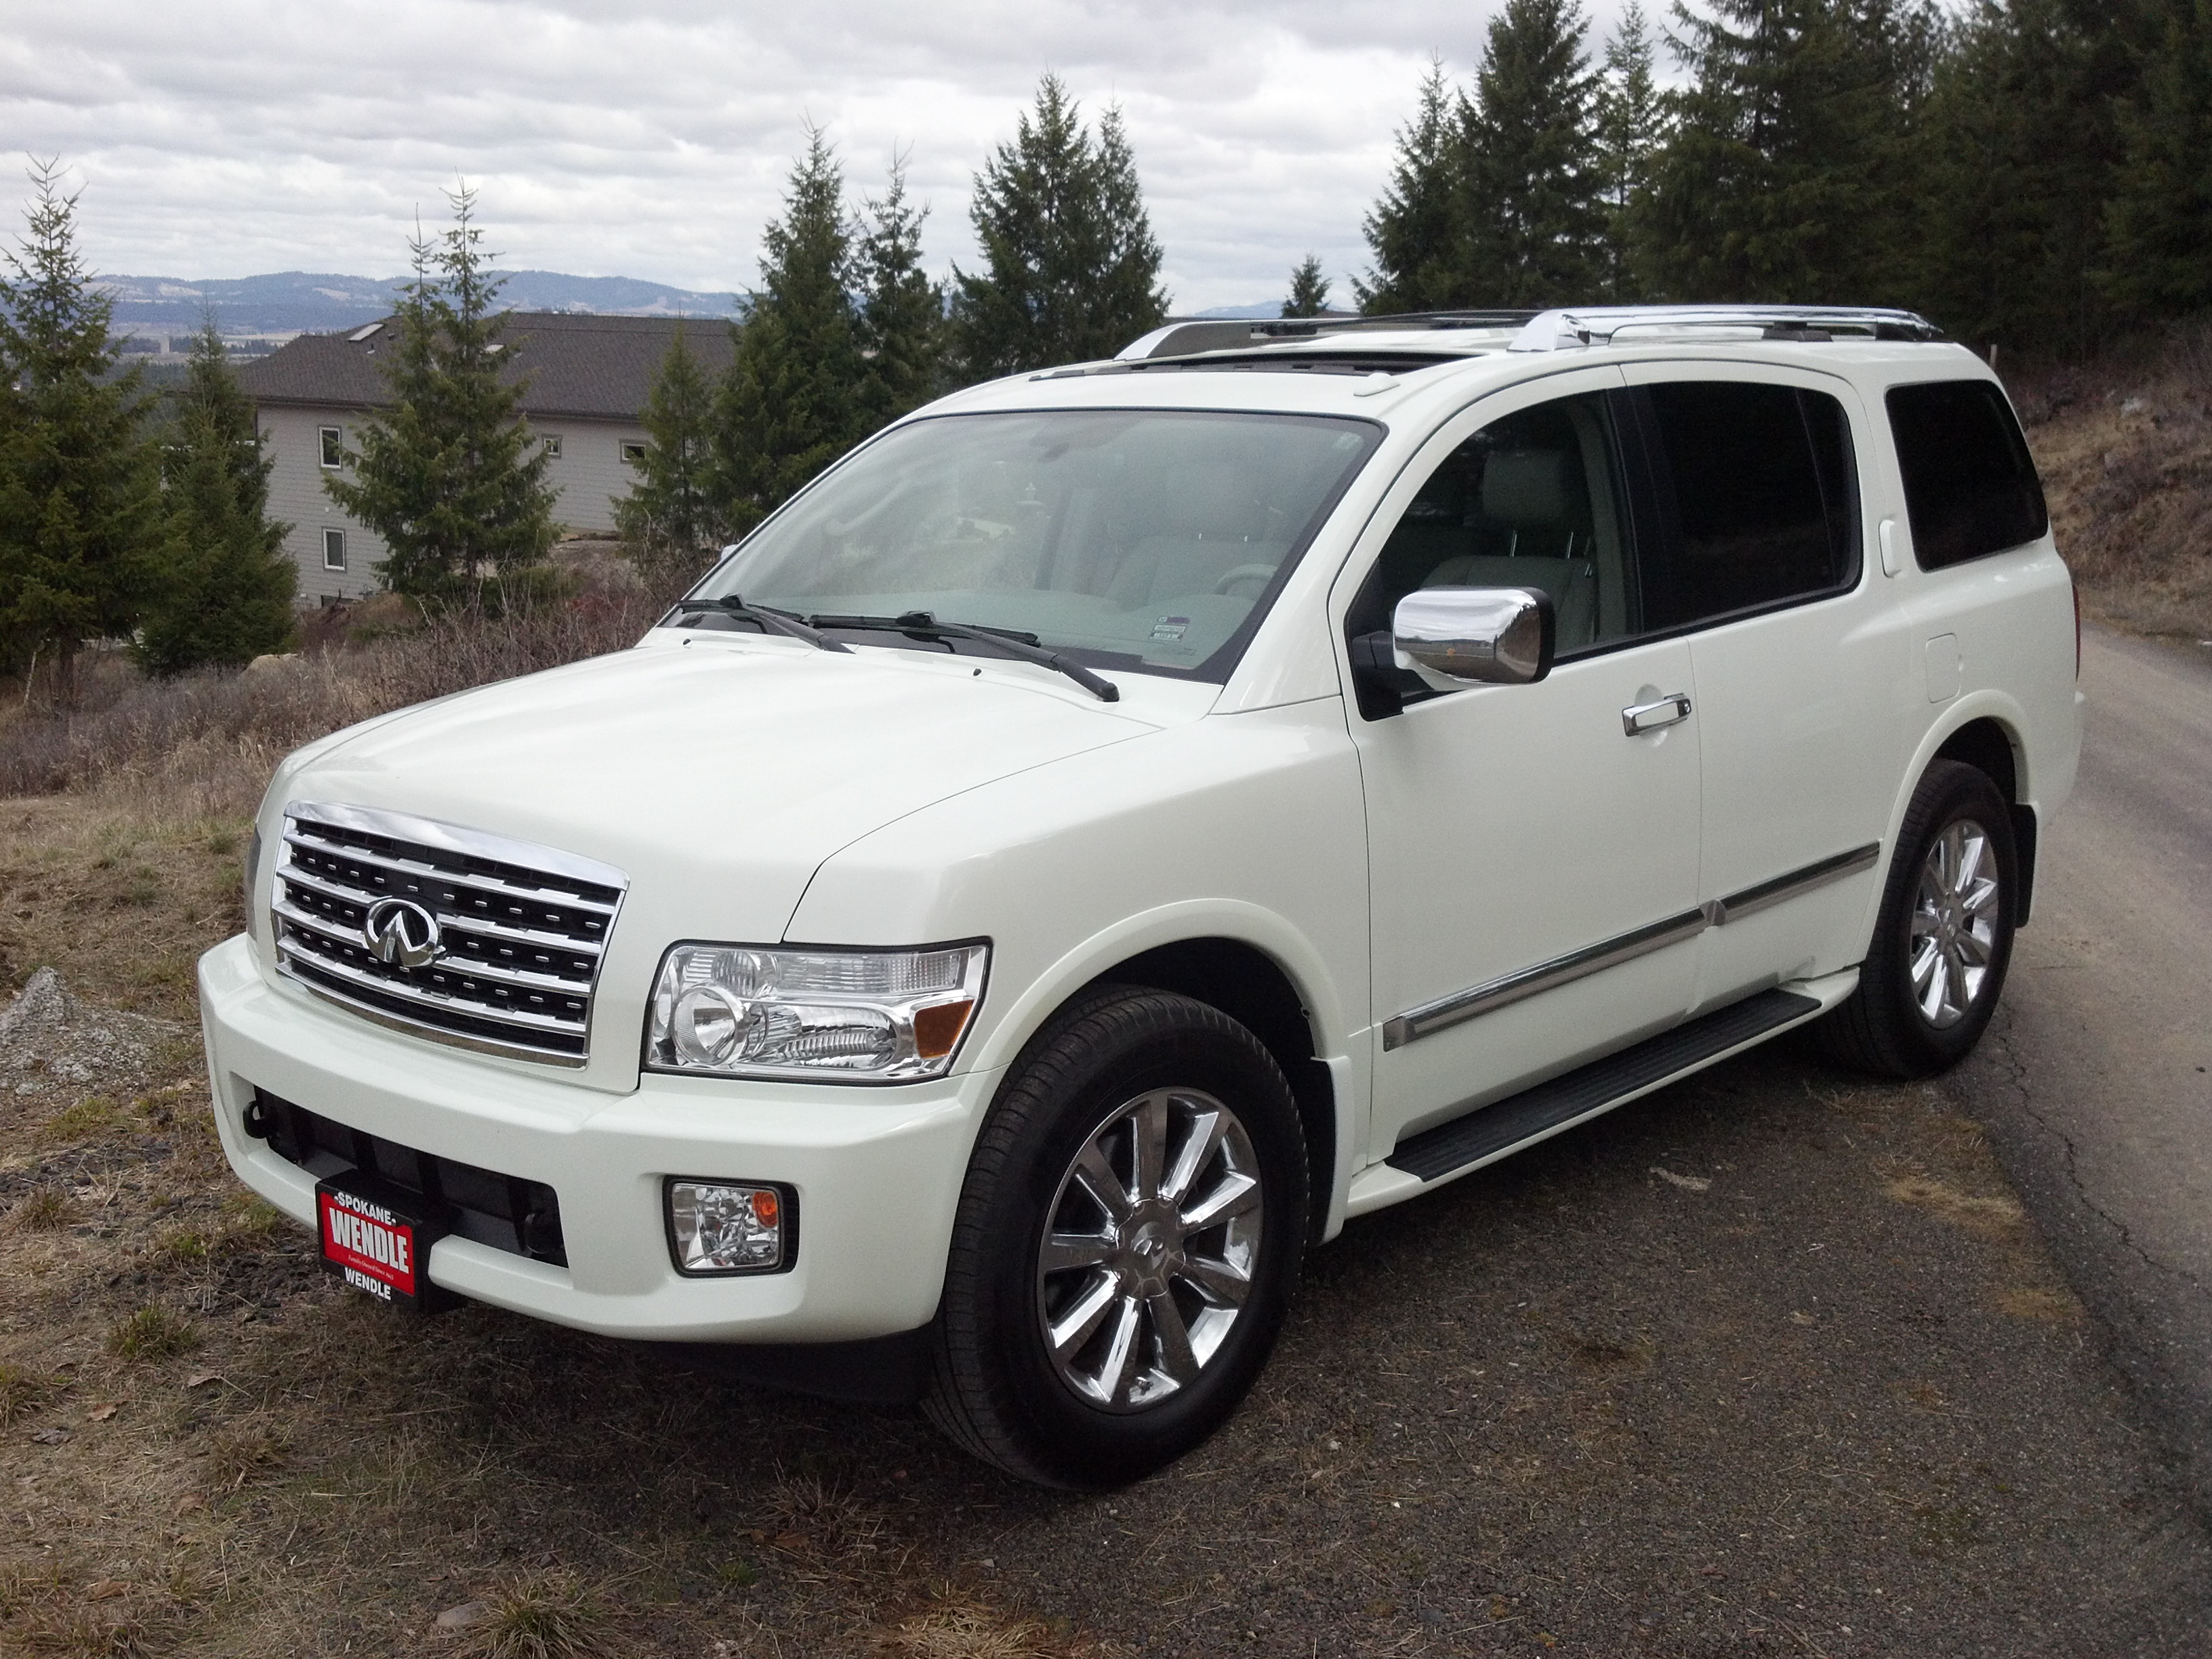 Only one vehicle now exists that comfortably fits 6'+ Tall people including the driver: Nissan Armada / Infiniti QX-56